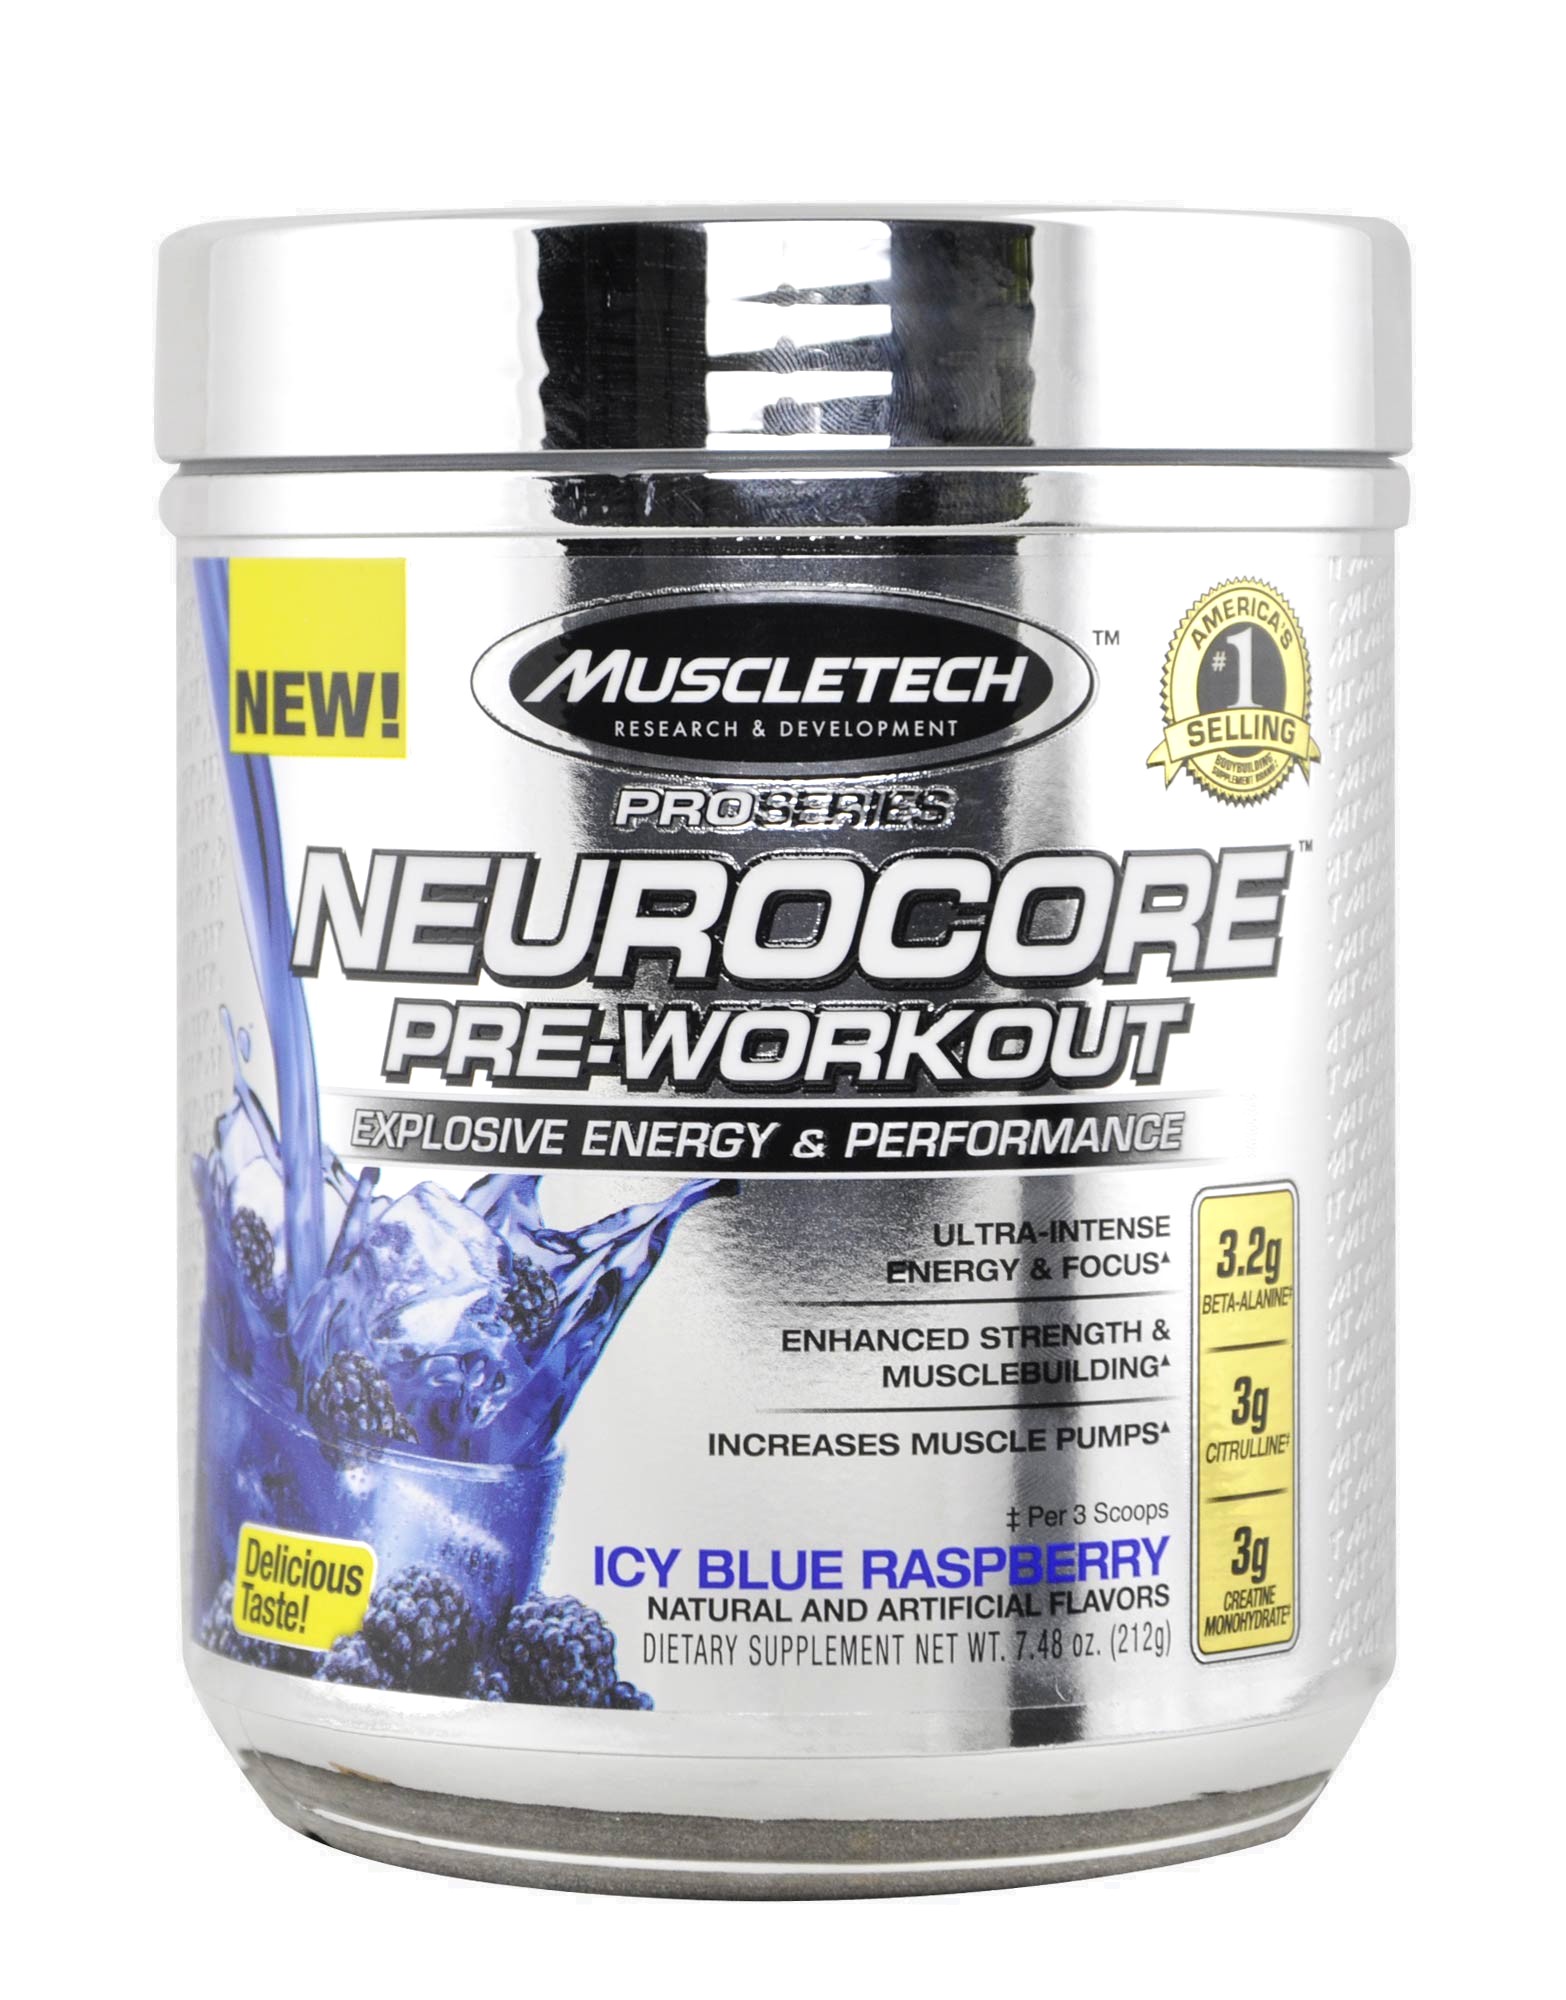 57 Recomended Muscletech new pre workout 